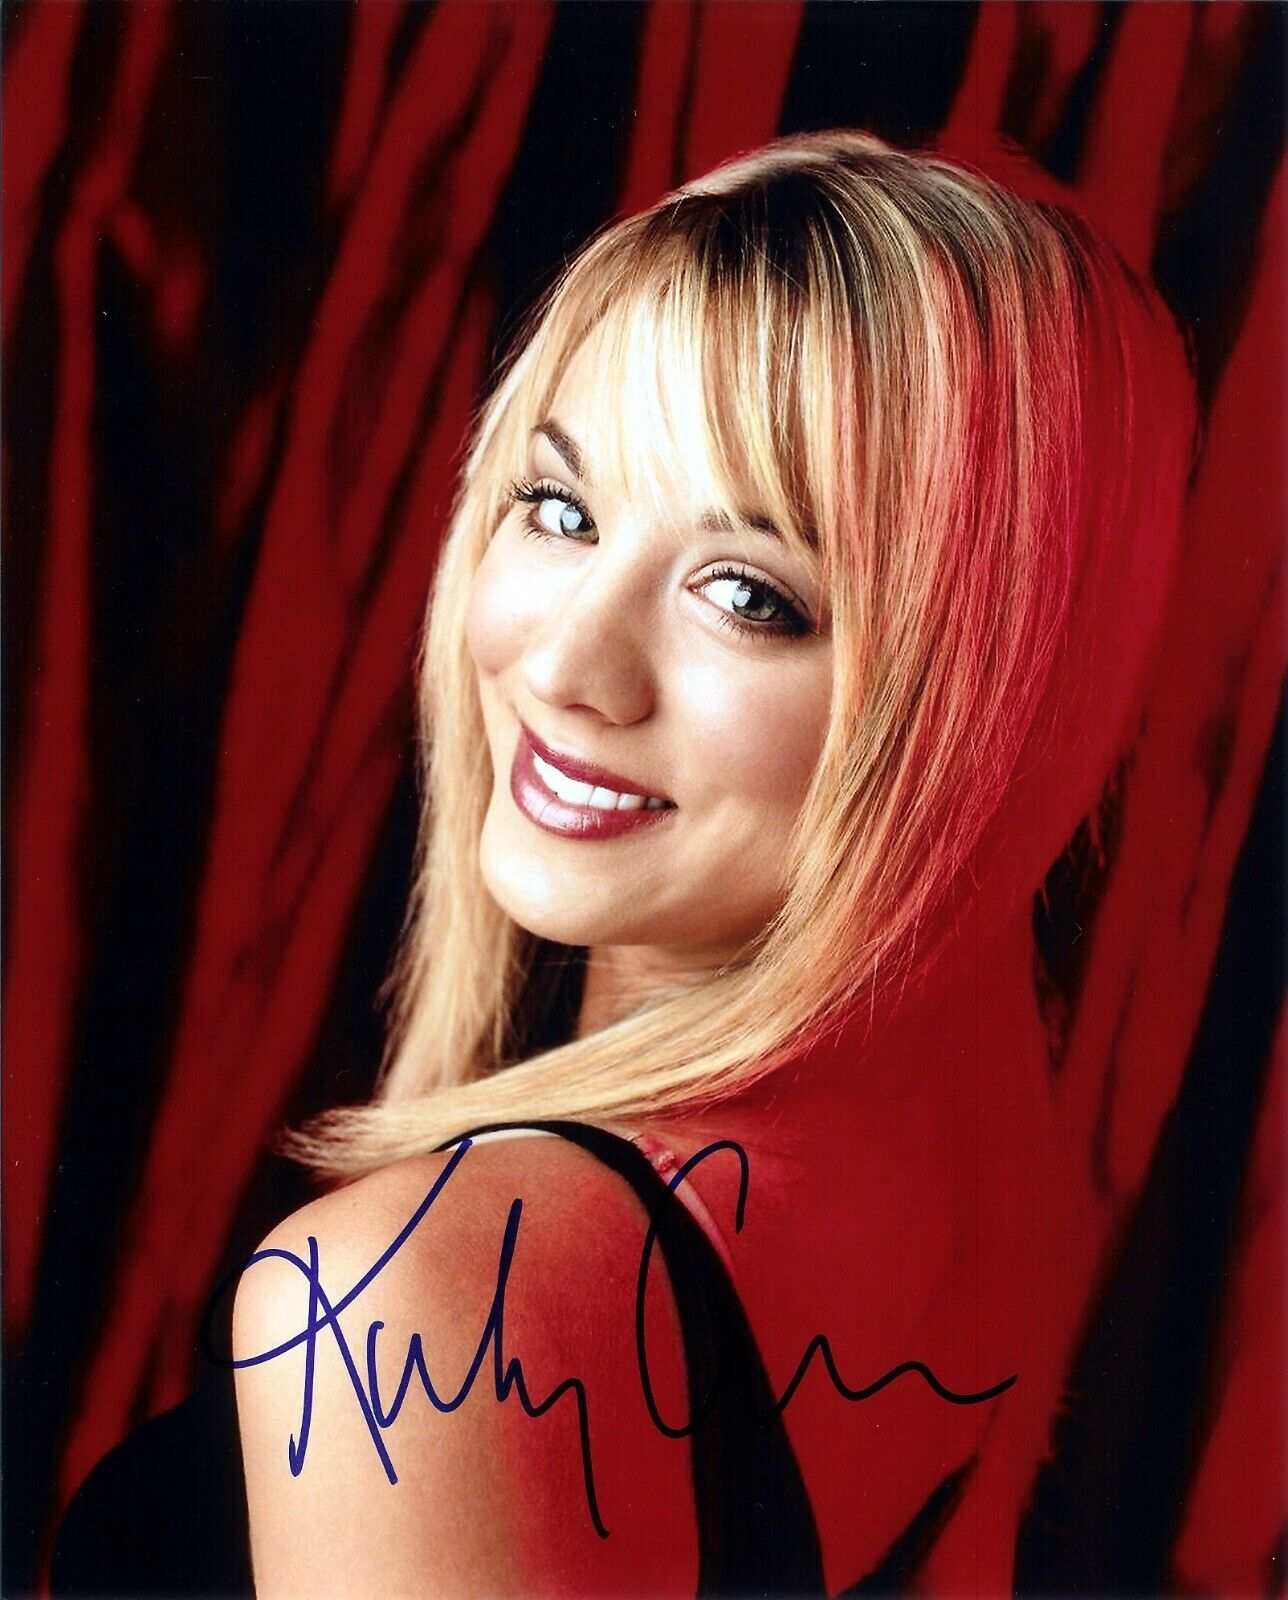 KALEY CUOCO - BIG BANG THEORY Autographed Signed 8x10 Reprint Photo Poster painting #2 !!